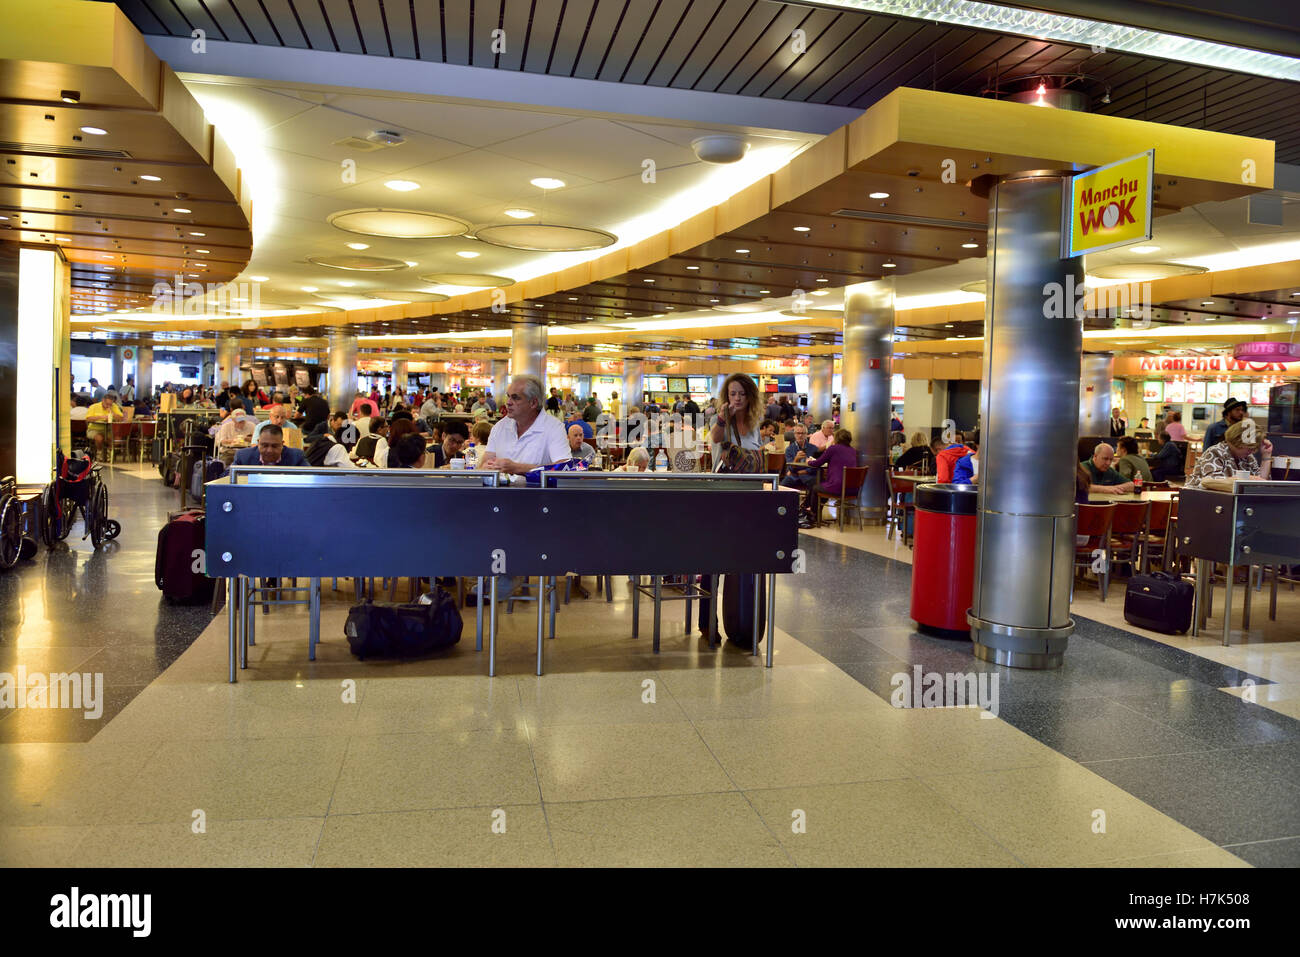 Chicago O'hare Airport High Resolution Stock Photography and Images - Alamy